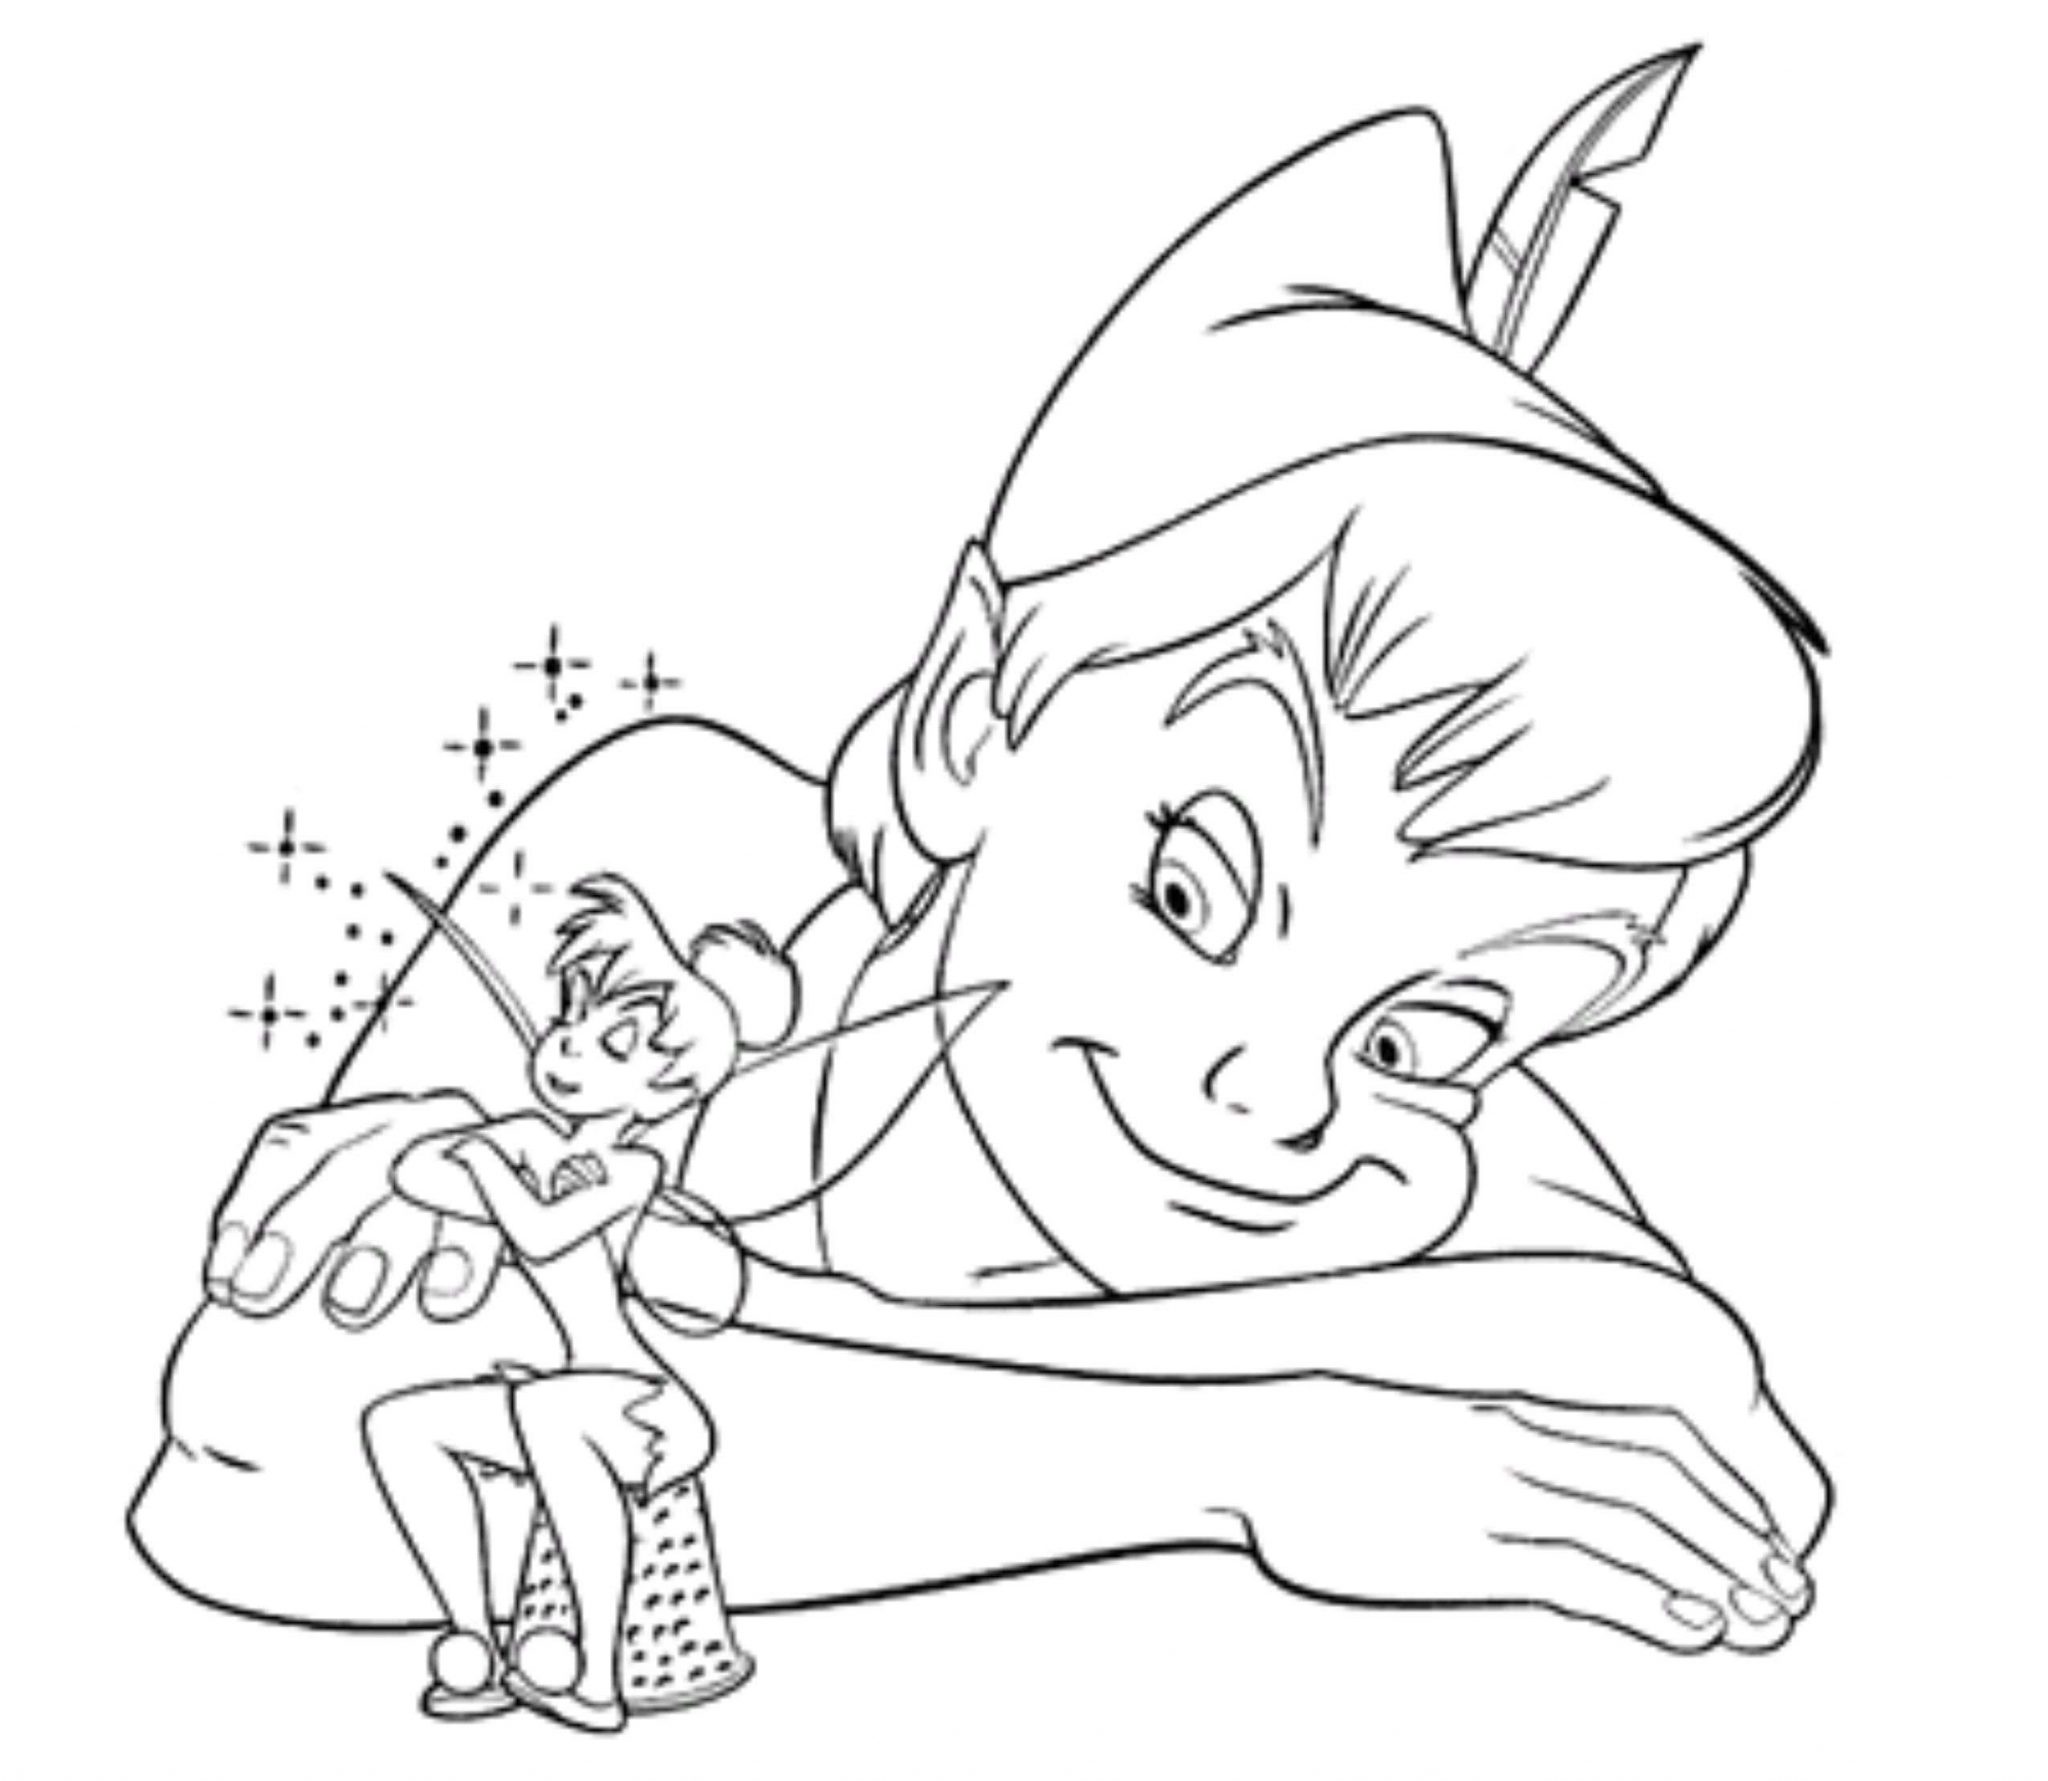 Download Print & Download - Fun Peter Pan Coloring Pages Downloaded for Free